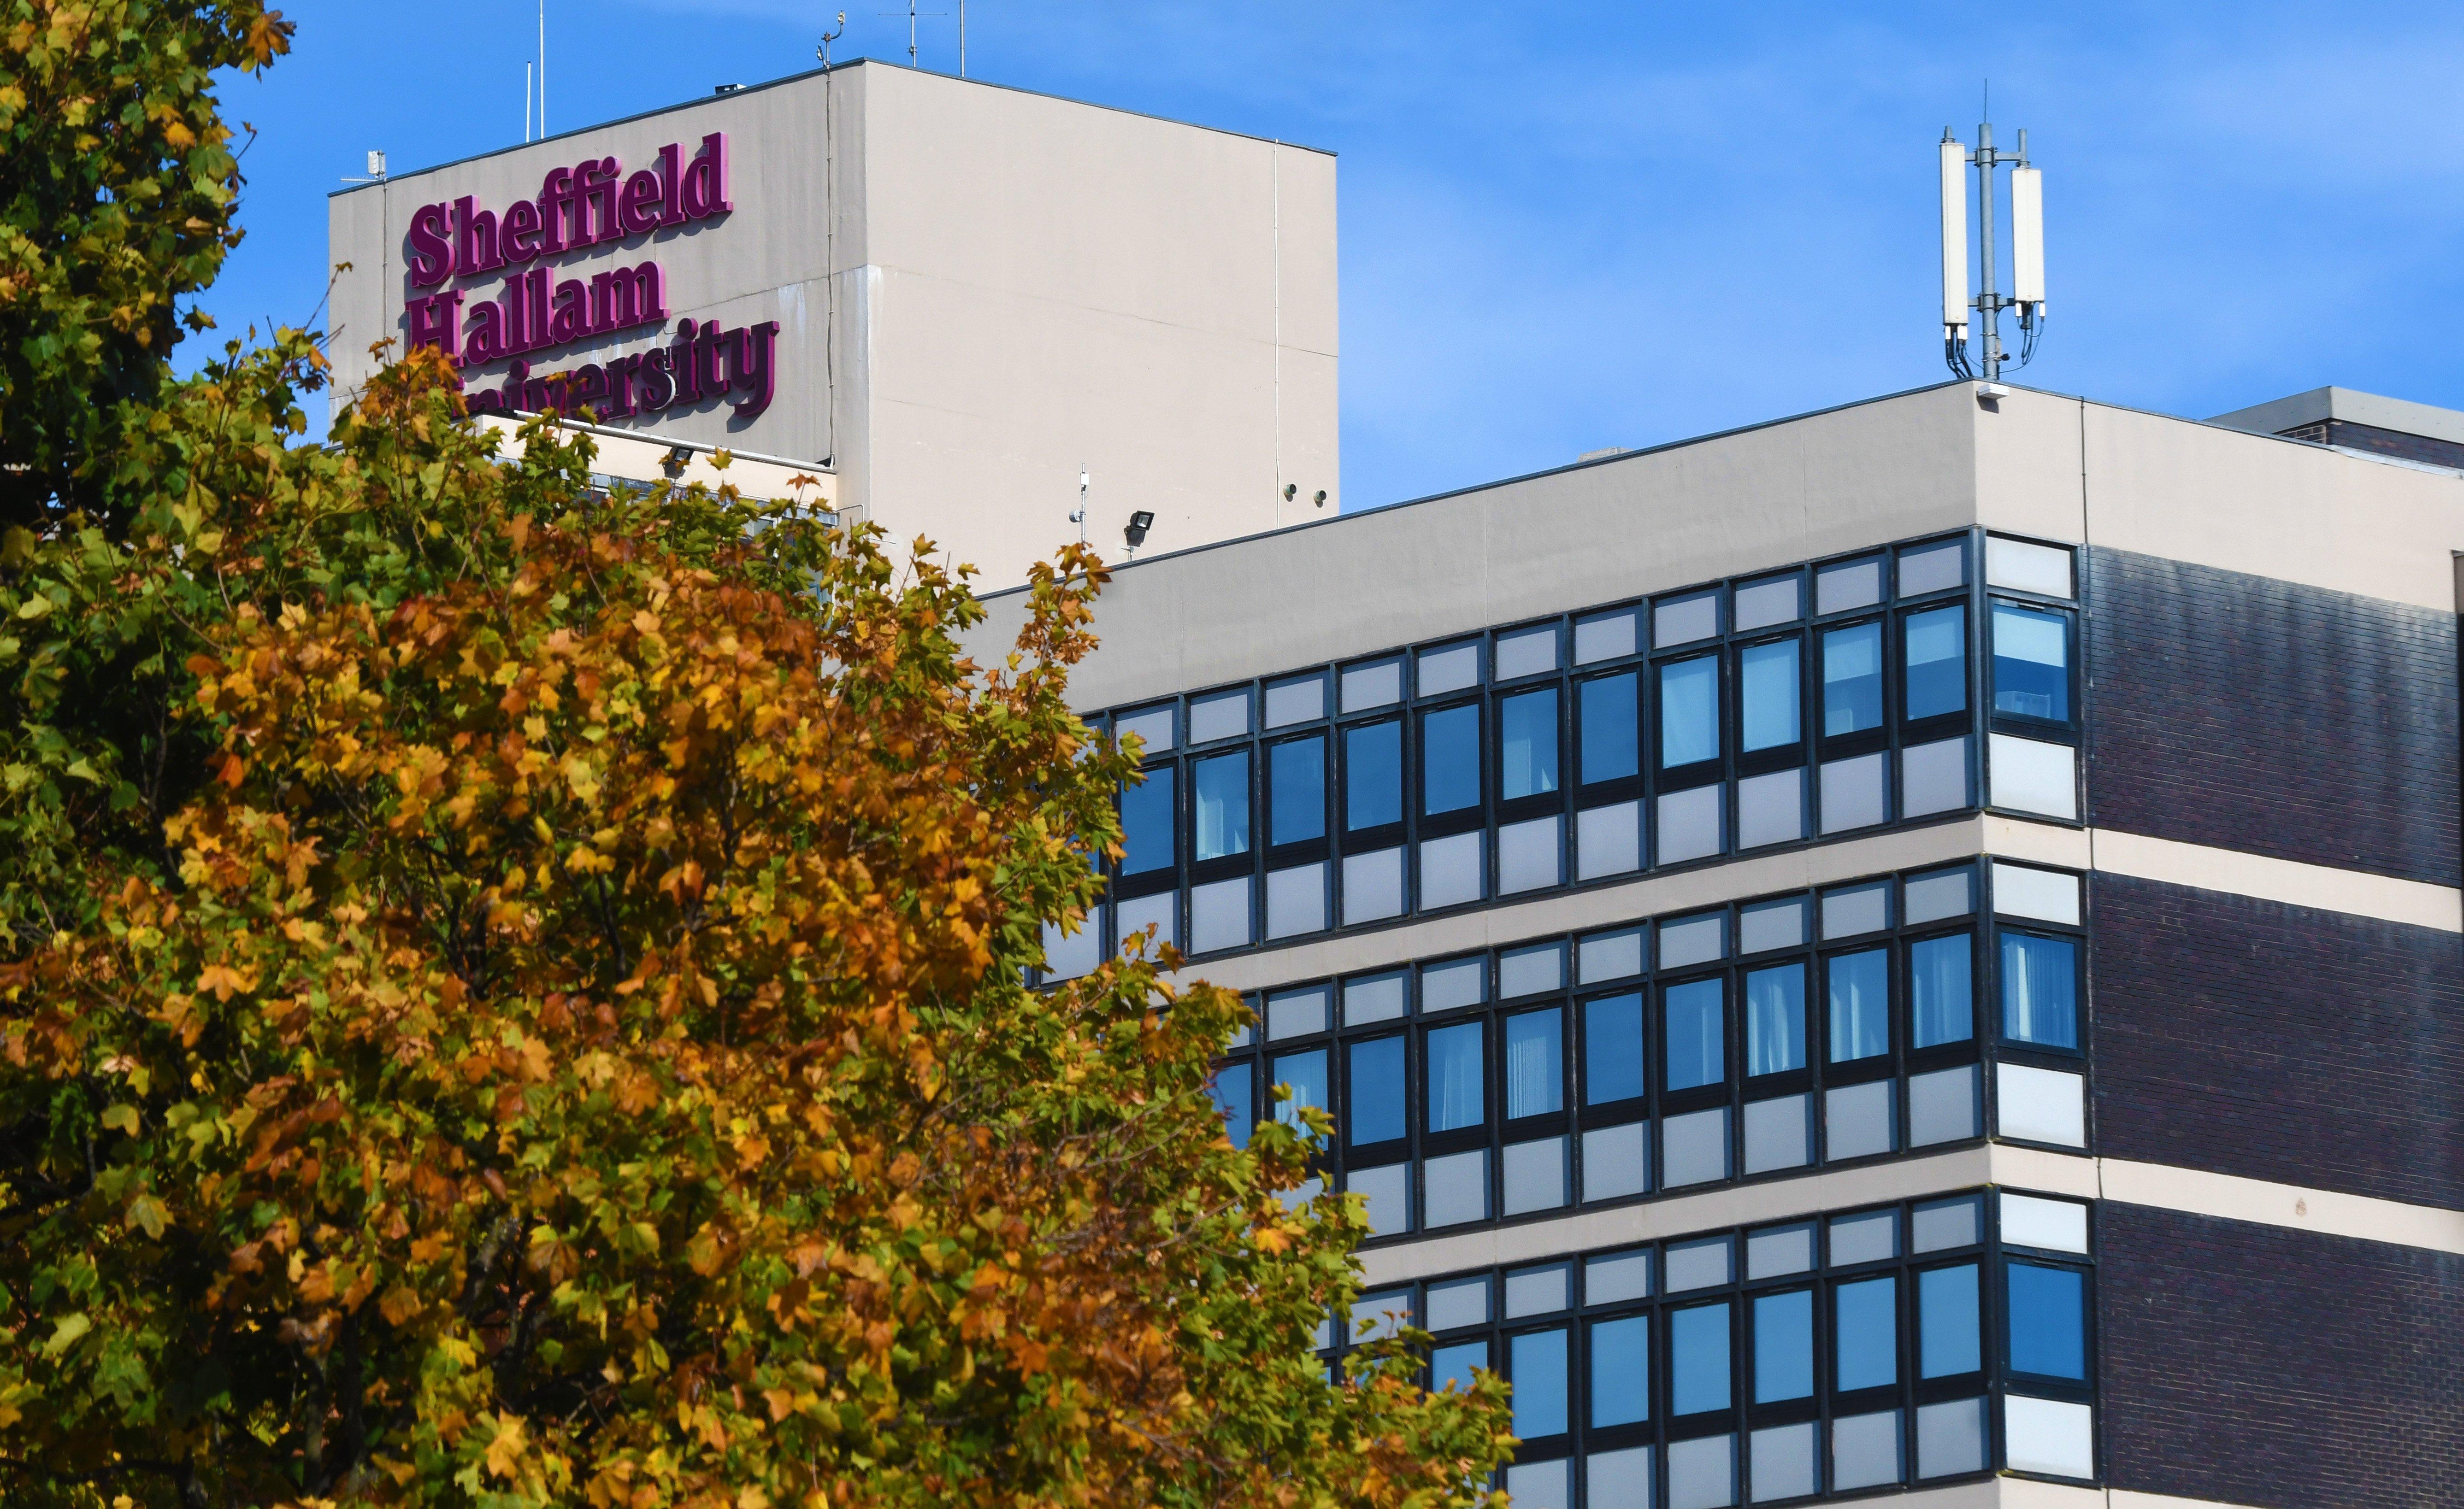 Sheffield Hallam named UK university of the year for teaching quality